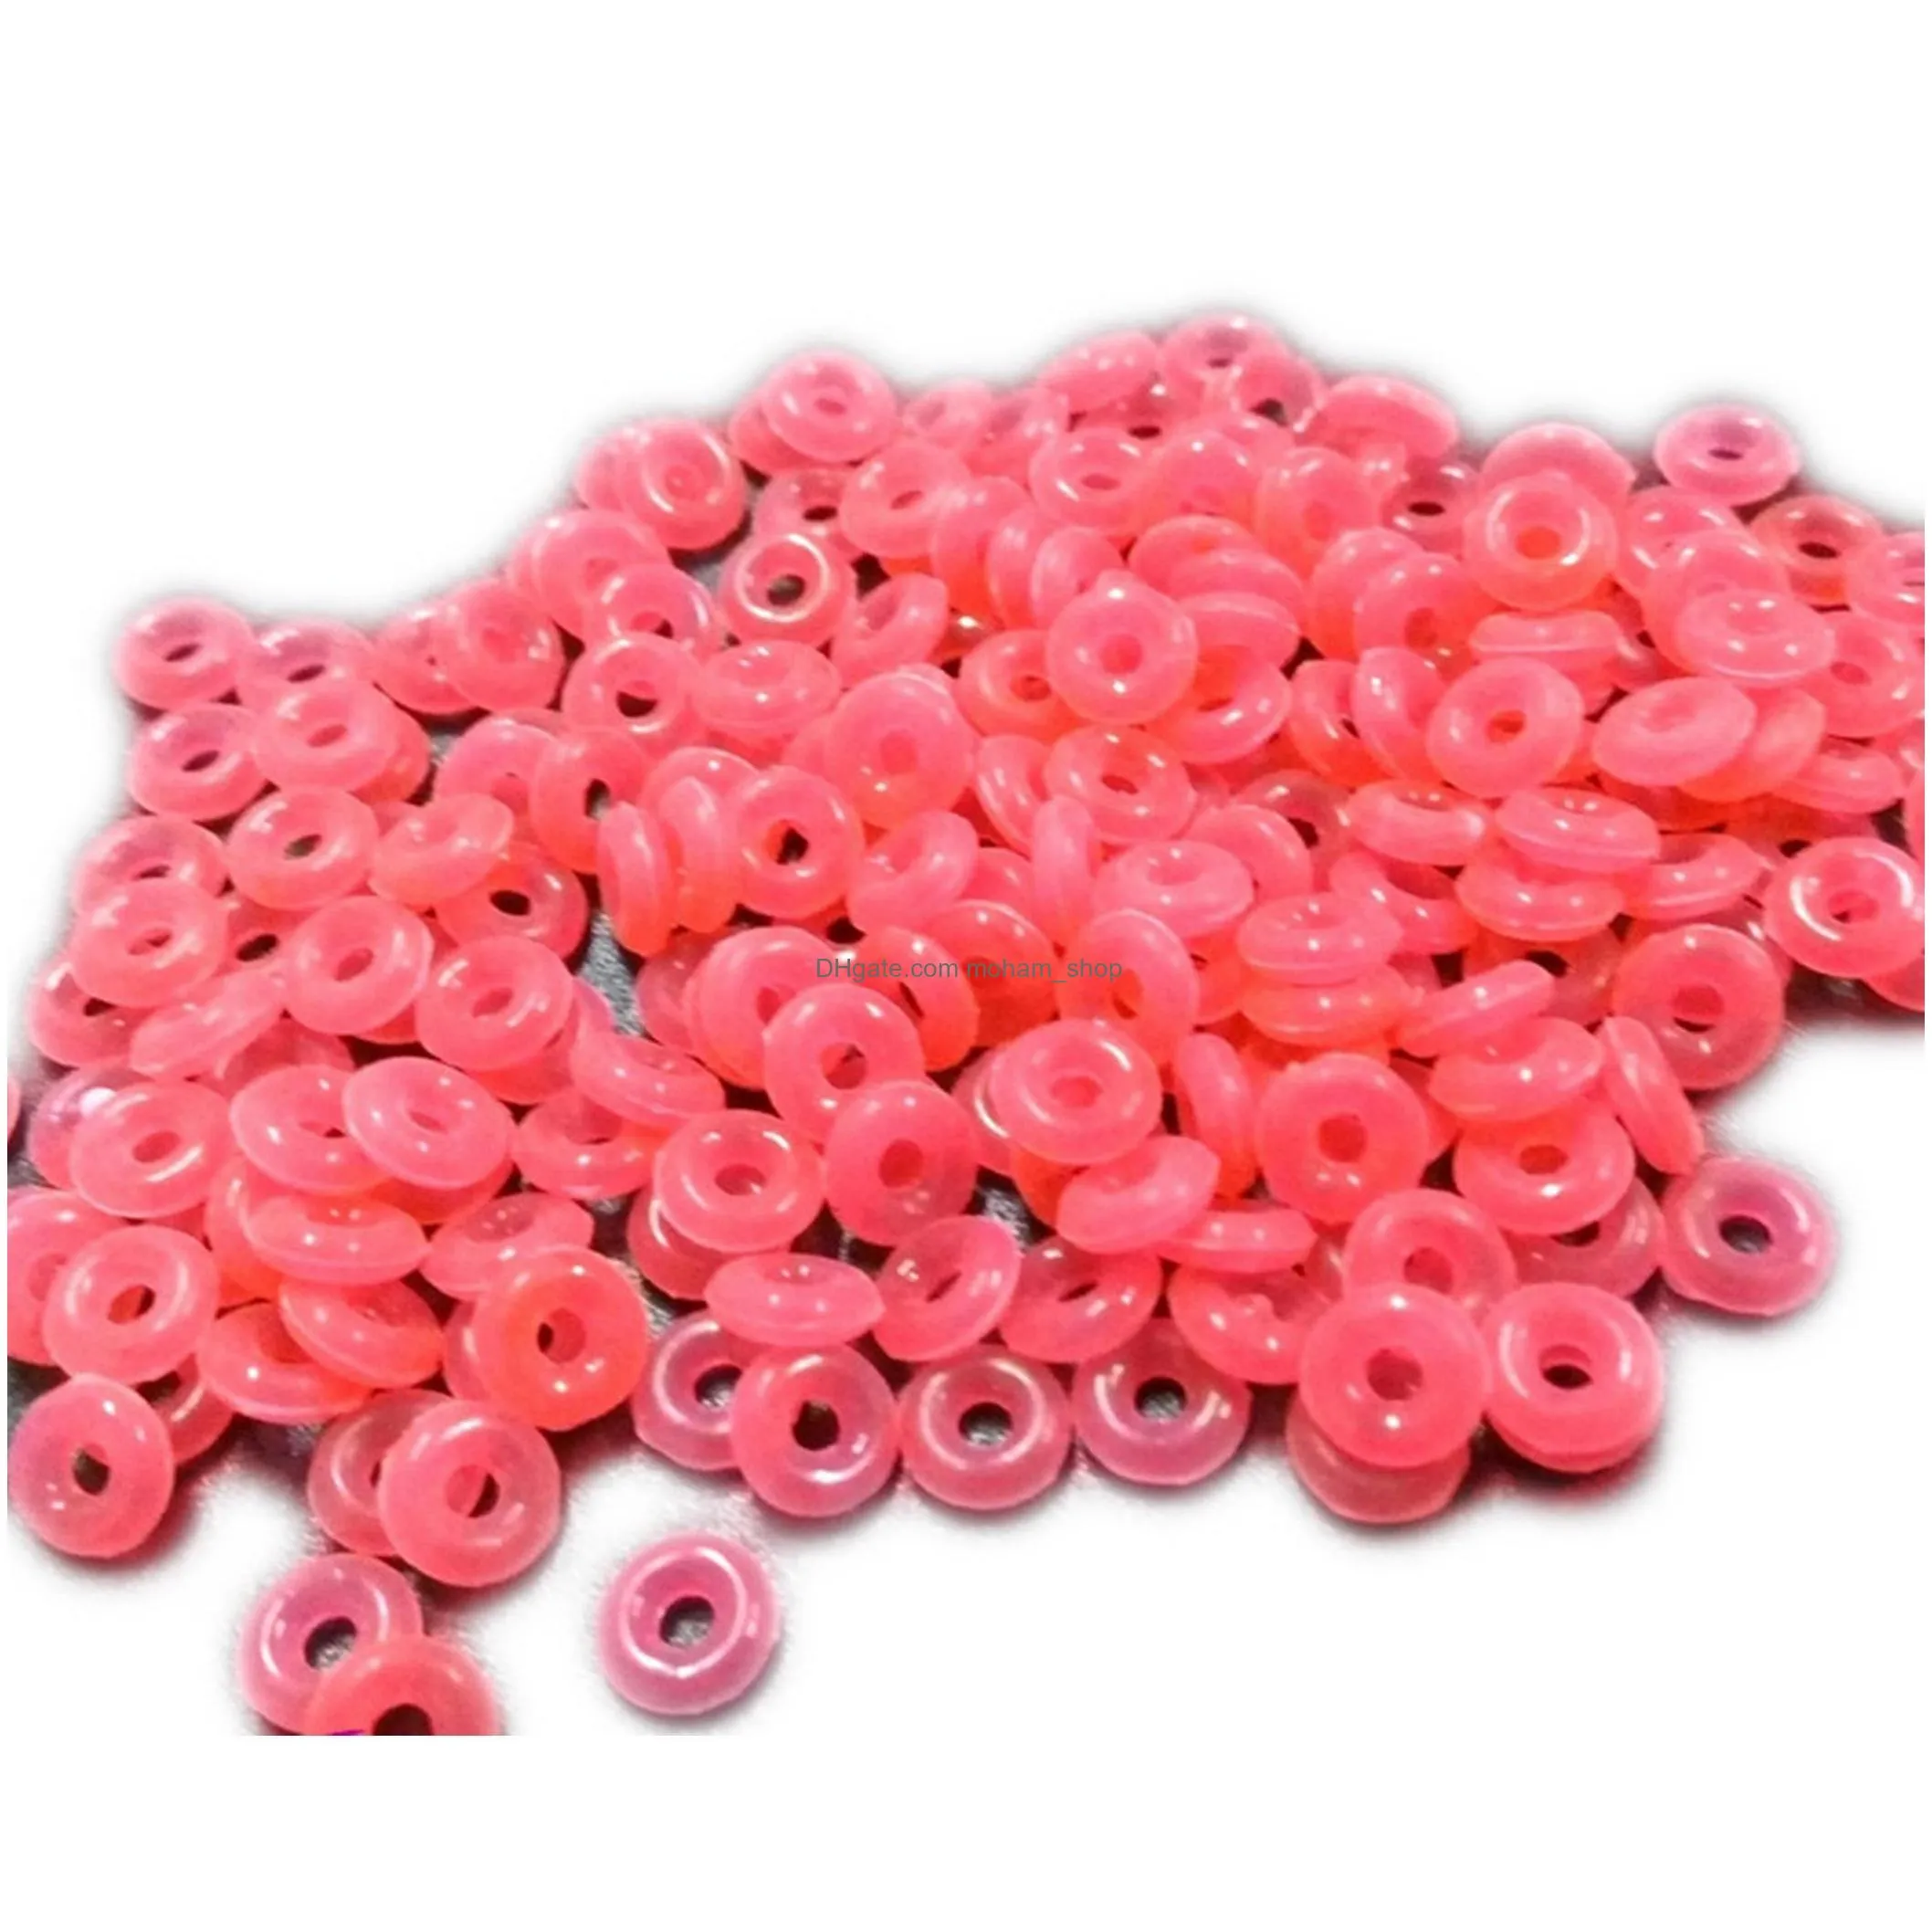 bead making tools 200pc sile rubber stopper spacer charm bracelet accessories pouch gift drop delivery home garden arts crafts dhqzg